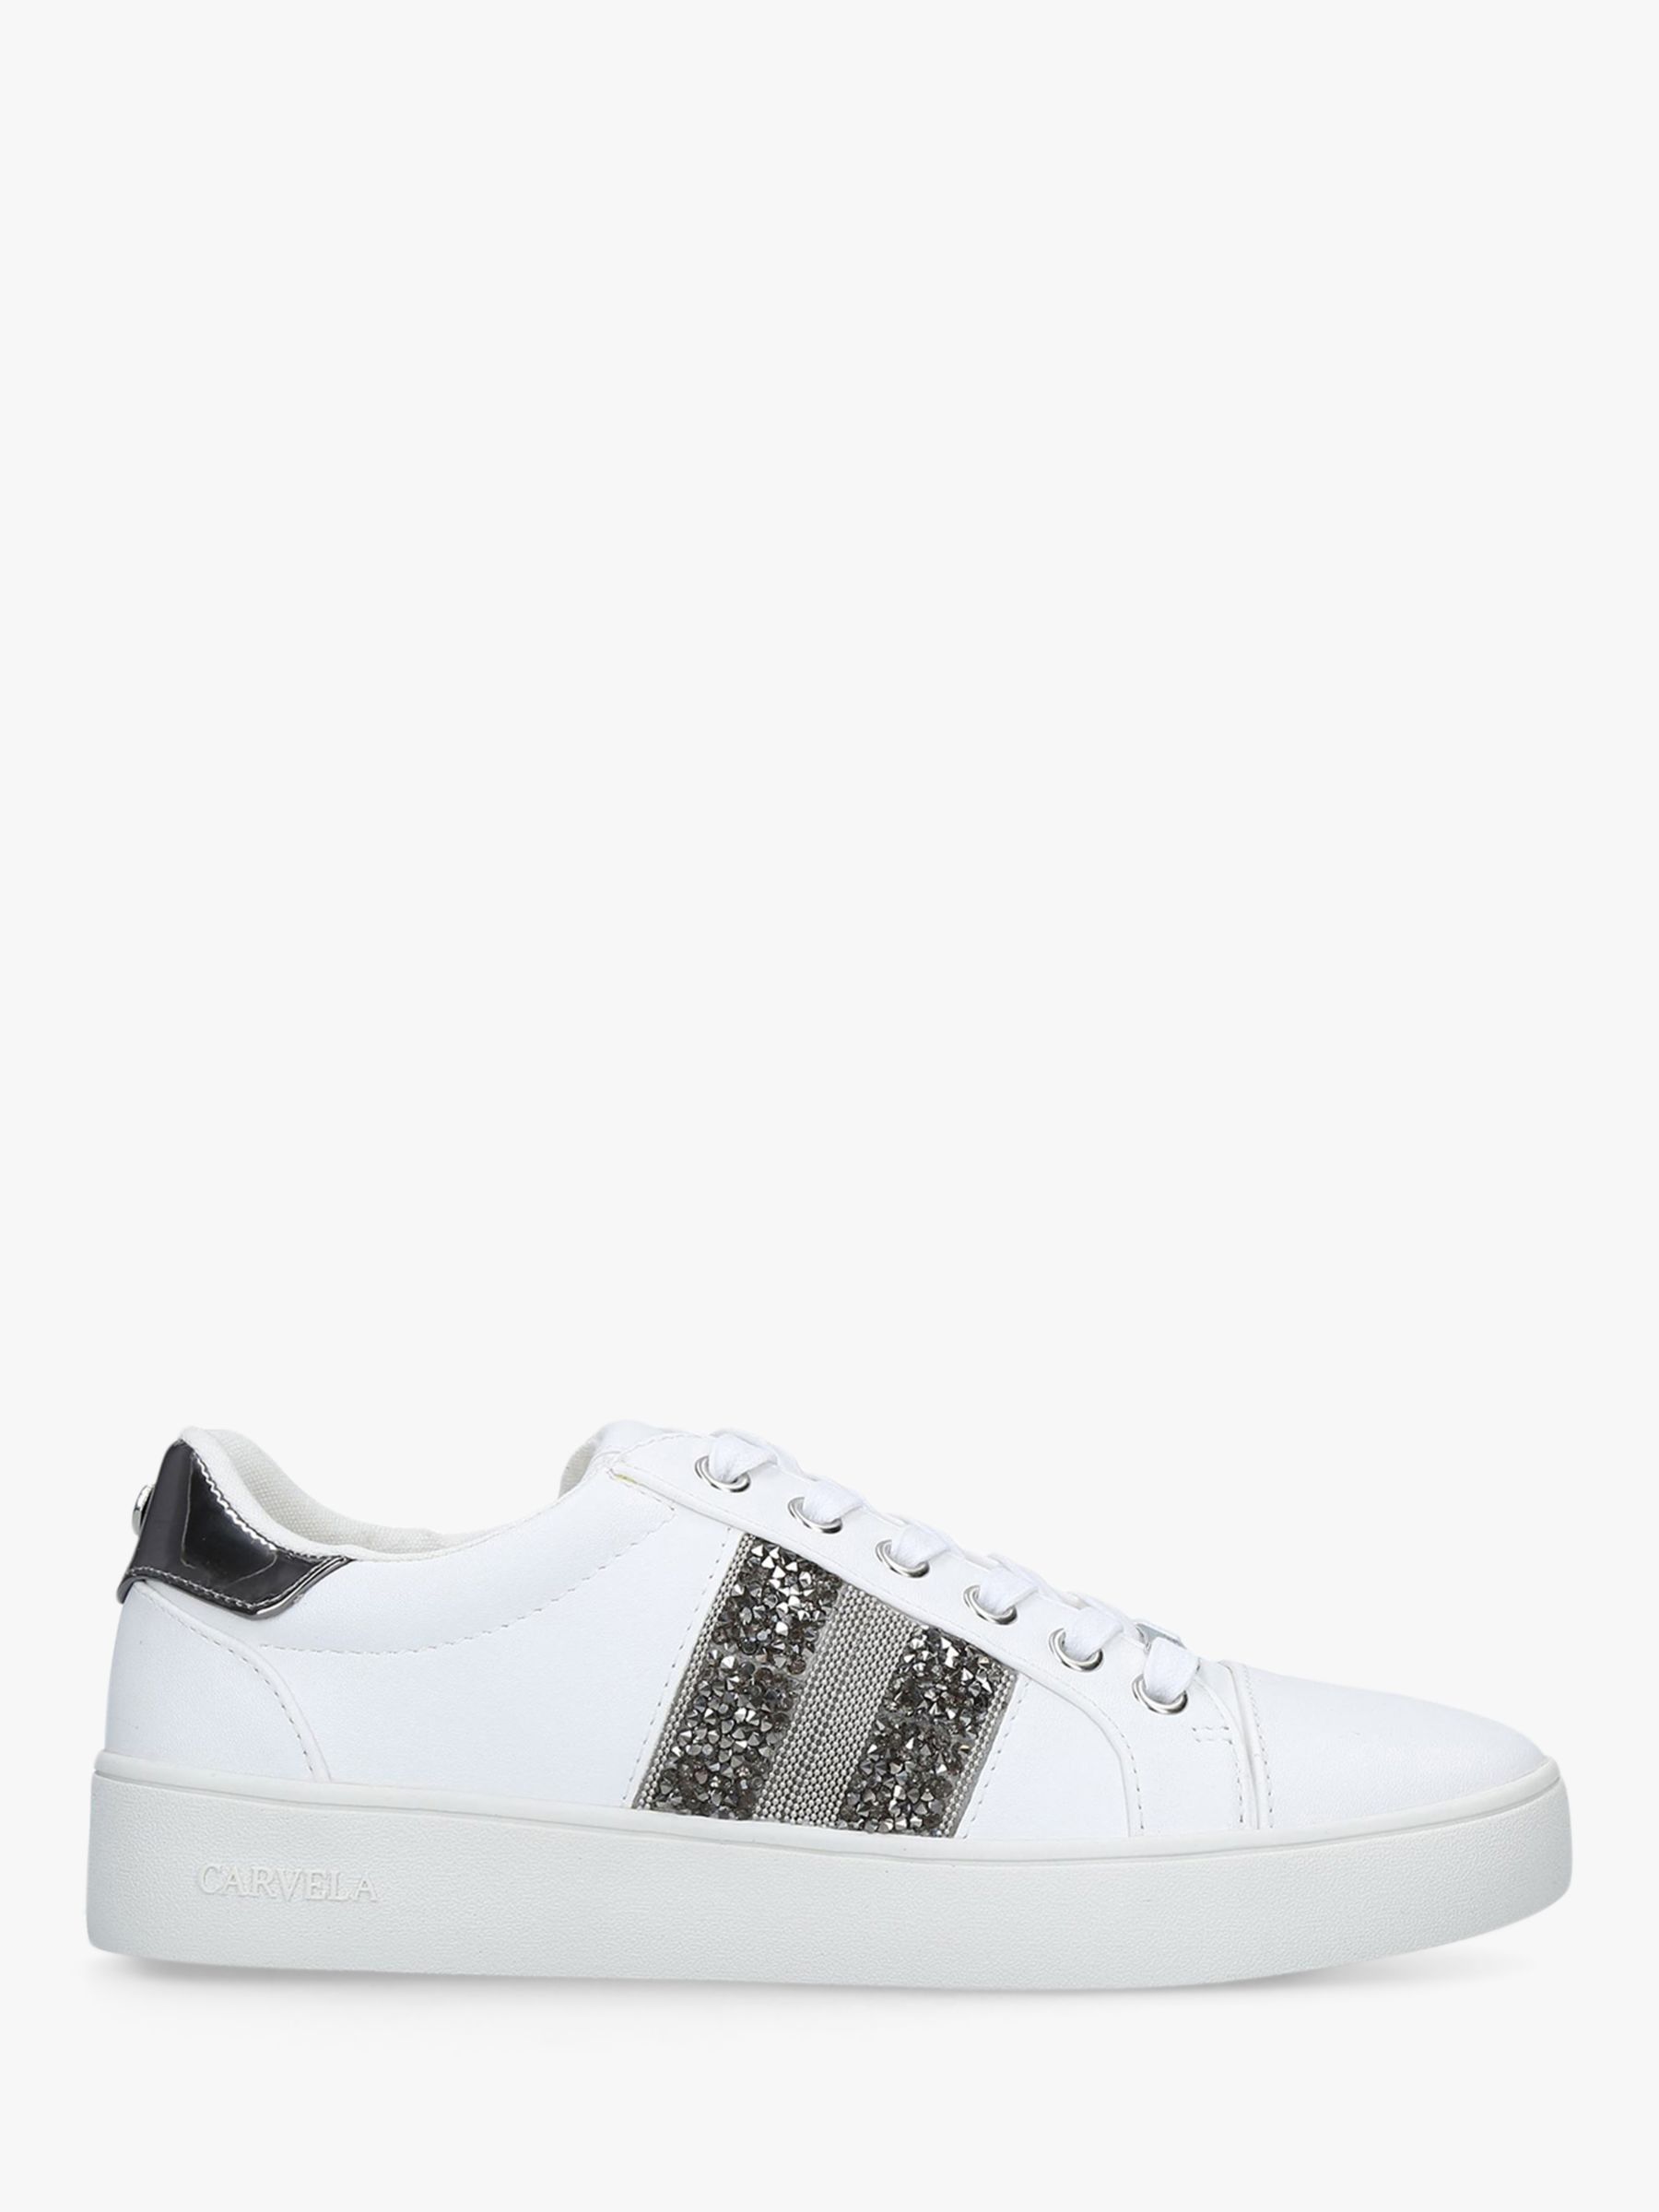 Carvela Luminous Embellished Low Top Trainers, White